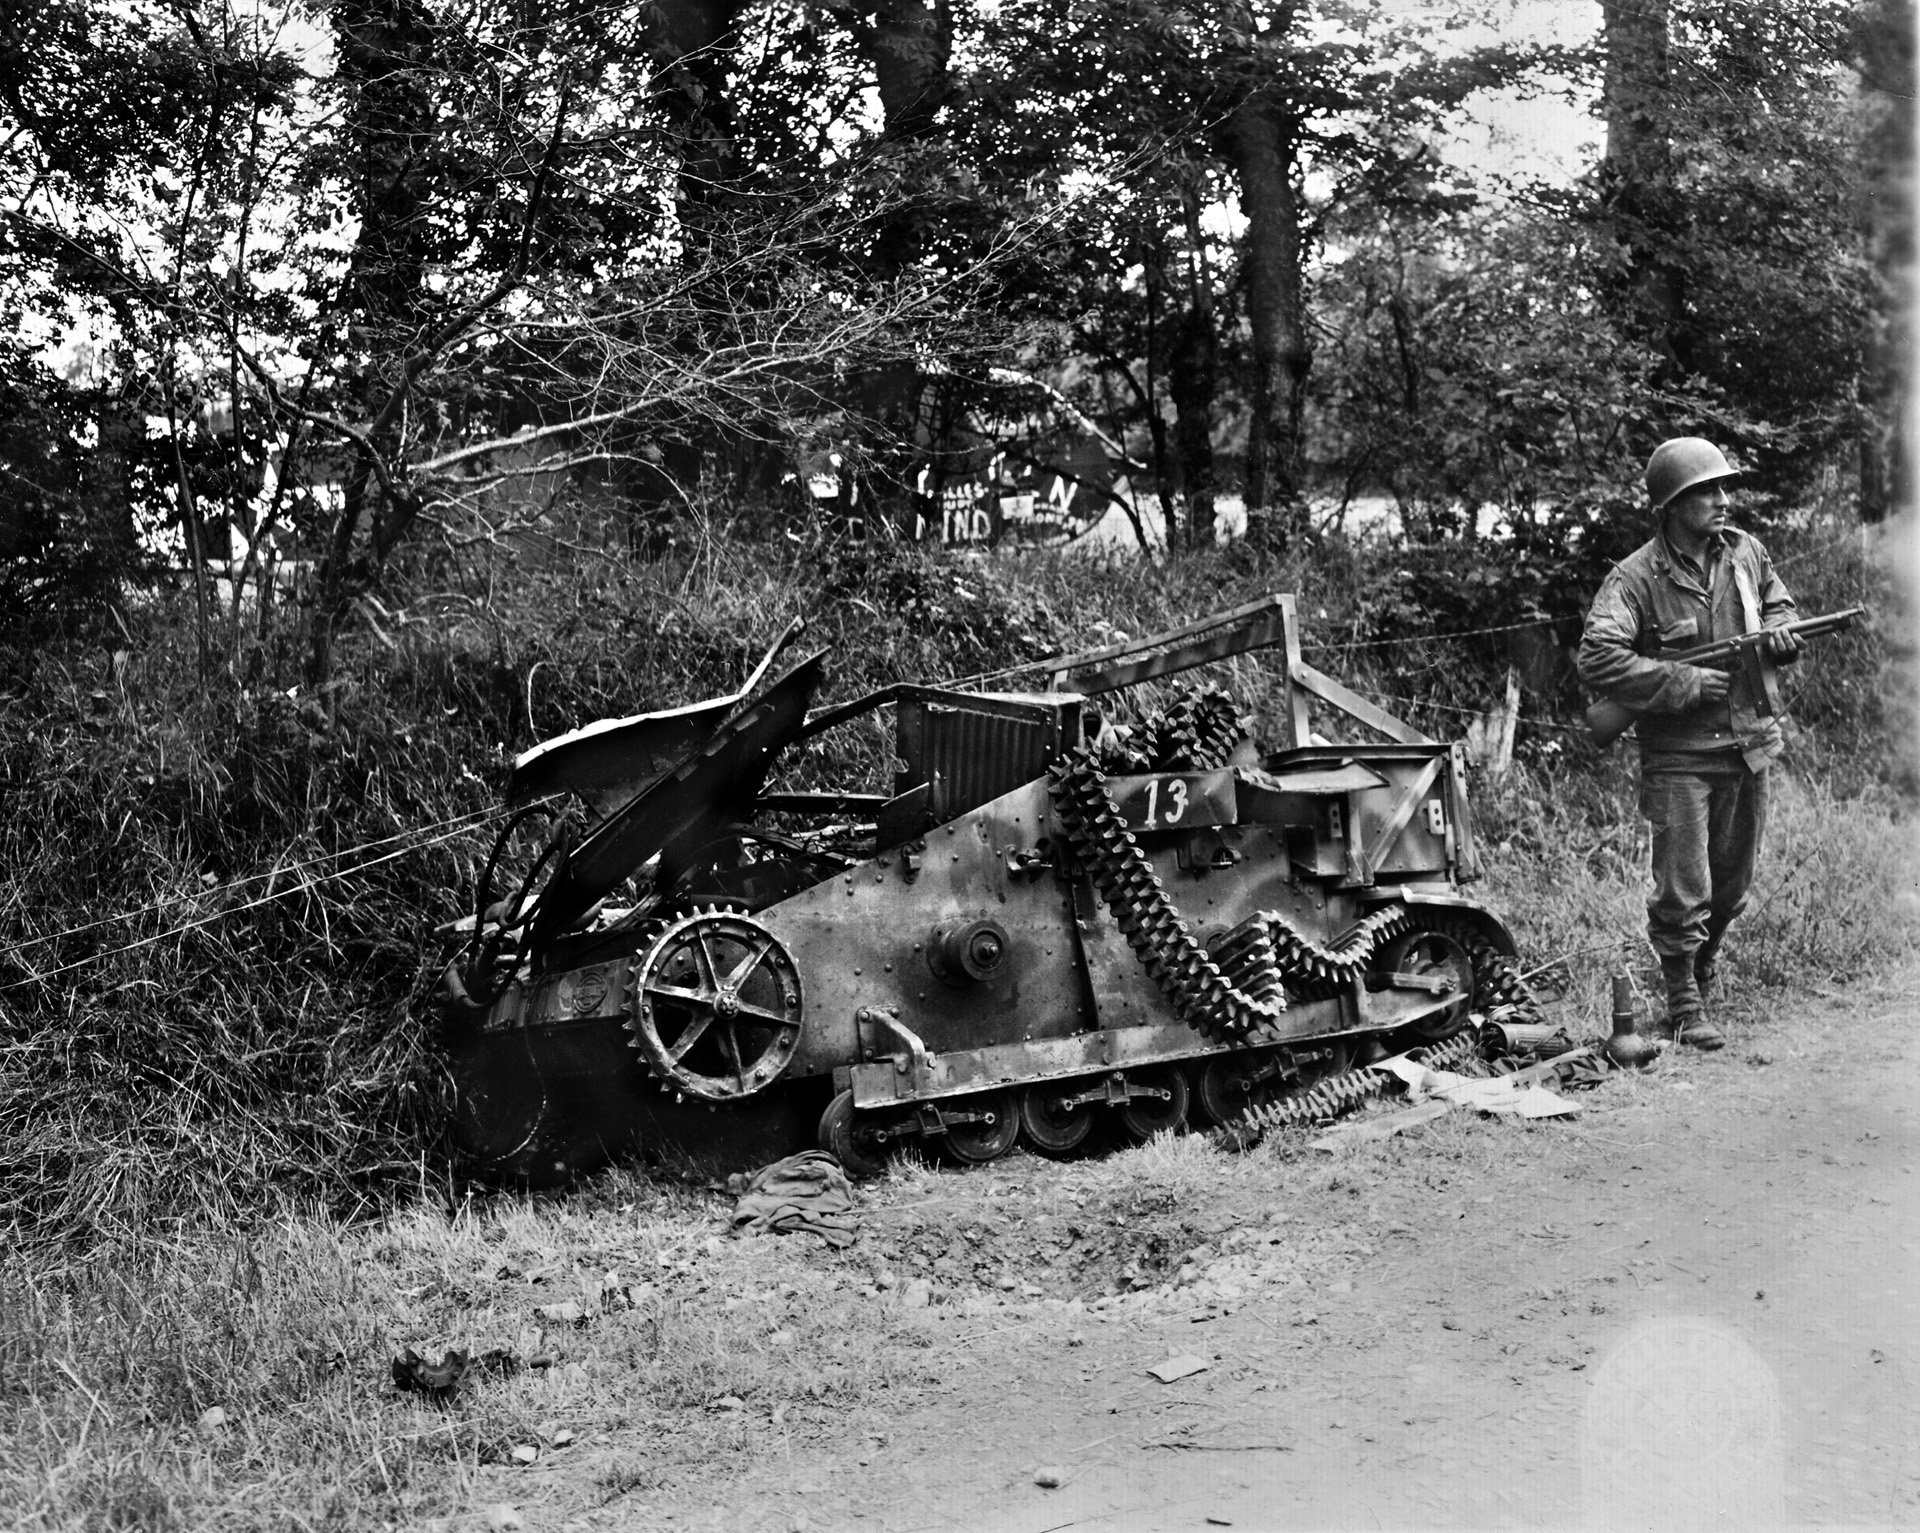 An American soldier with a Thompson sub-machine gun stands next to what appears to be a destroyed German Kettenkraftrad near Carentan. An American glider is visible through the trees.